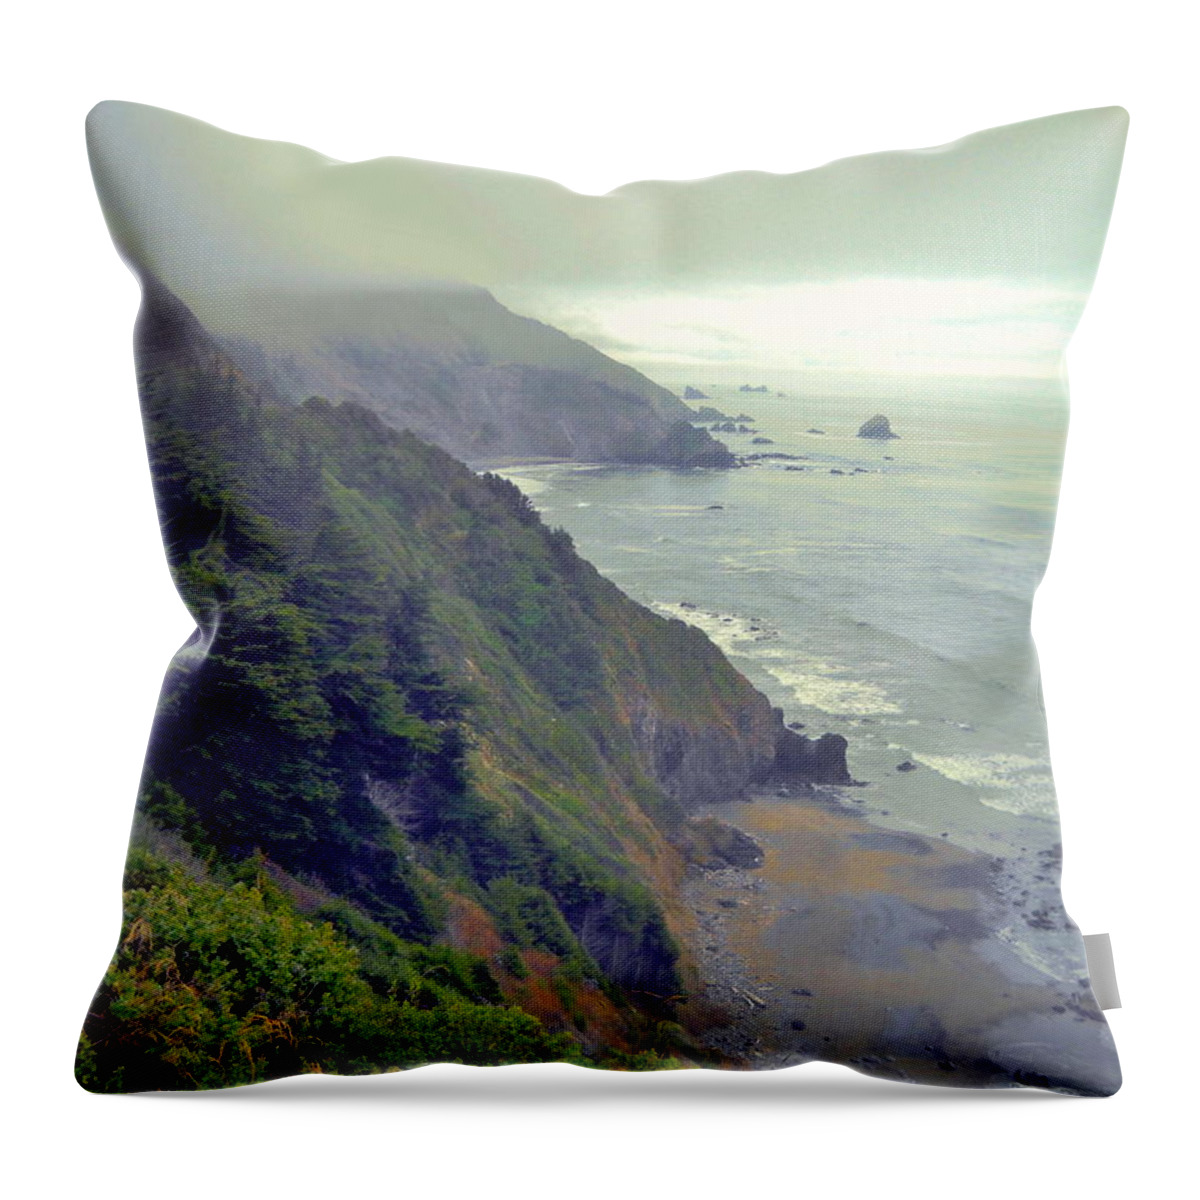 Ocean Throw Pillow featuring the photograph Mystic by Marilyn Diaz